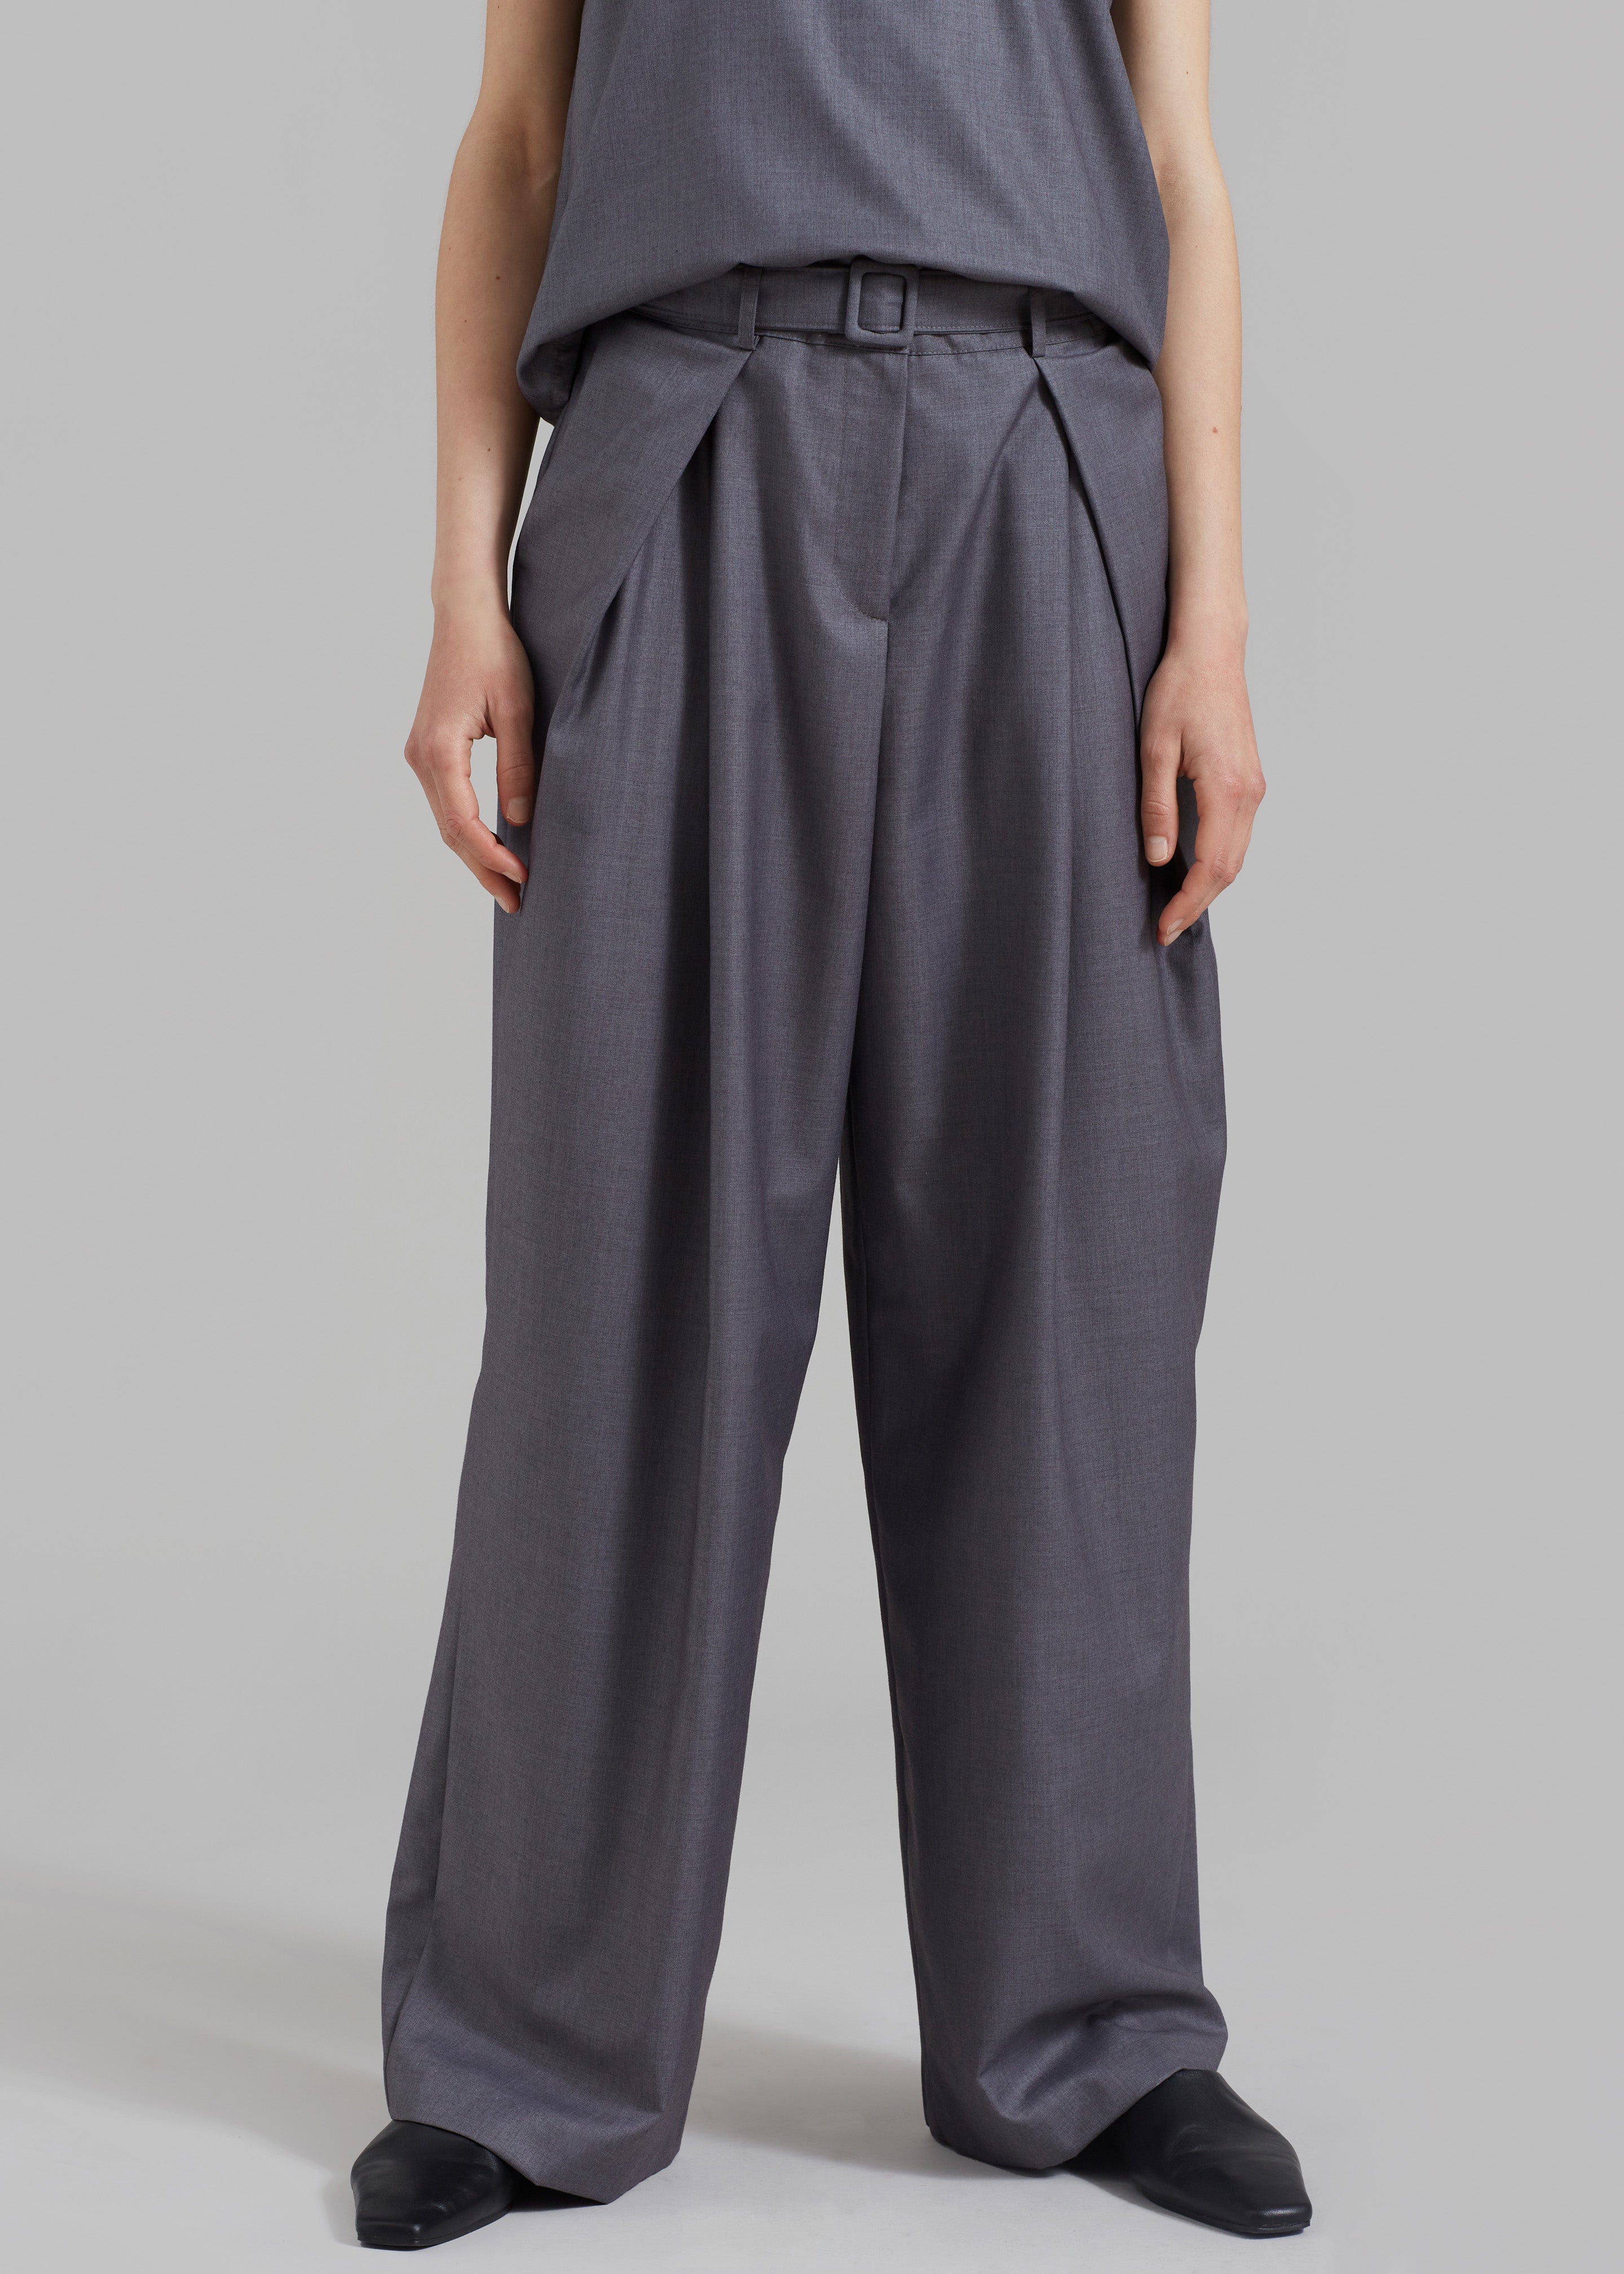 Clay Belted Pants - Grey - 5